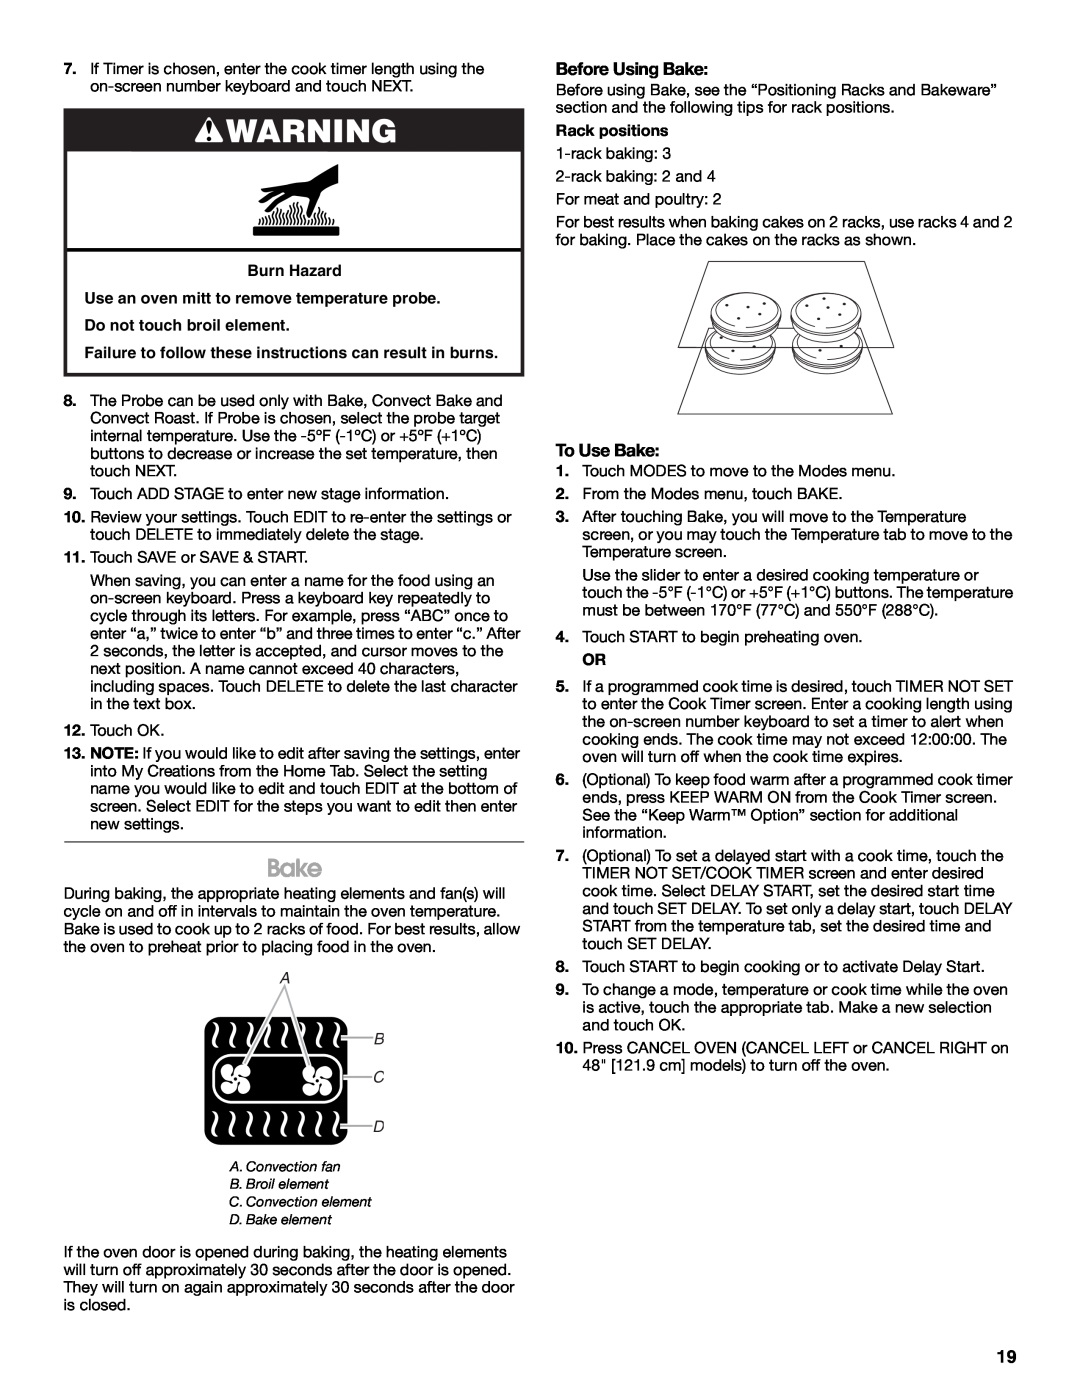 Jenn-Air JDRP430 Before Using Bake, To Use Bake, Burn Hazard, Failure to follow these instructions can result in burns 